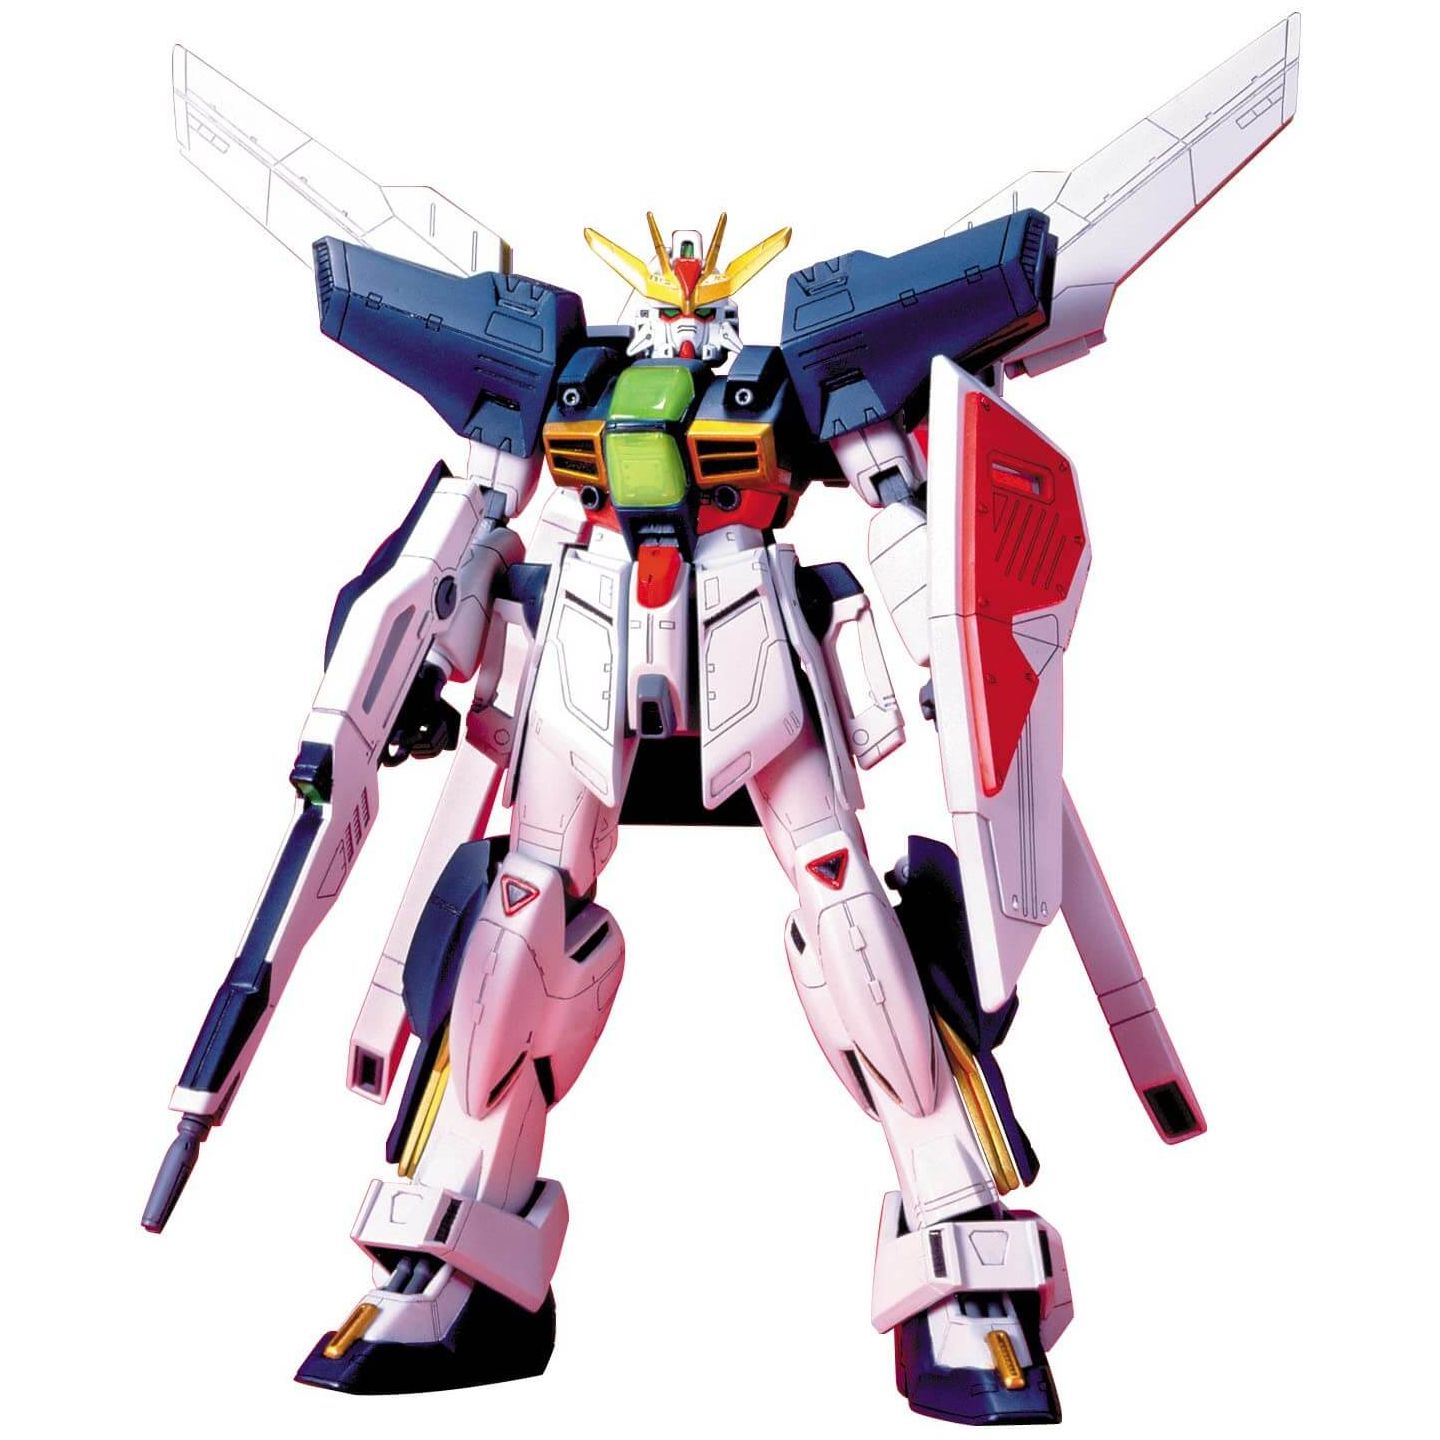 Bandai Ban055021 1/100 G Falcon Unit After War Gundam X Model Kit F/s From Japan for sale online 